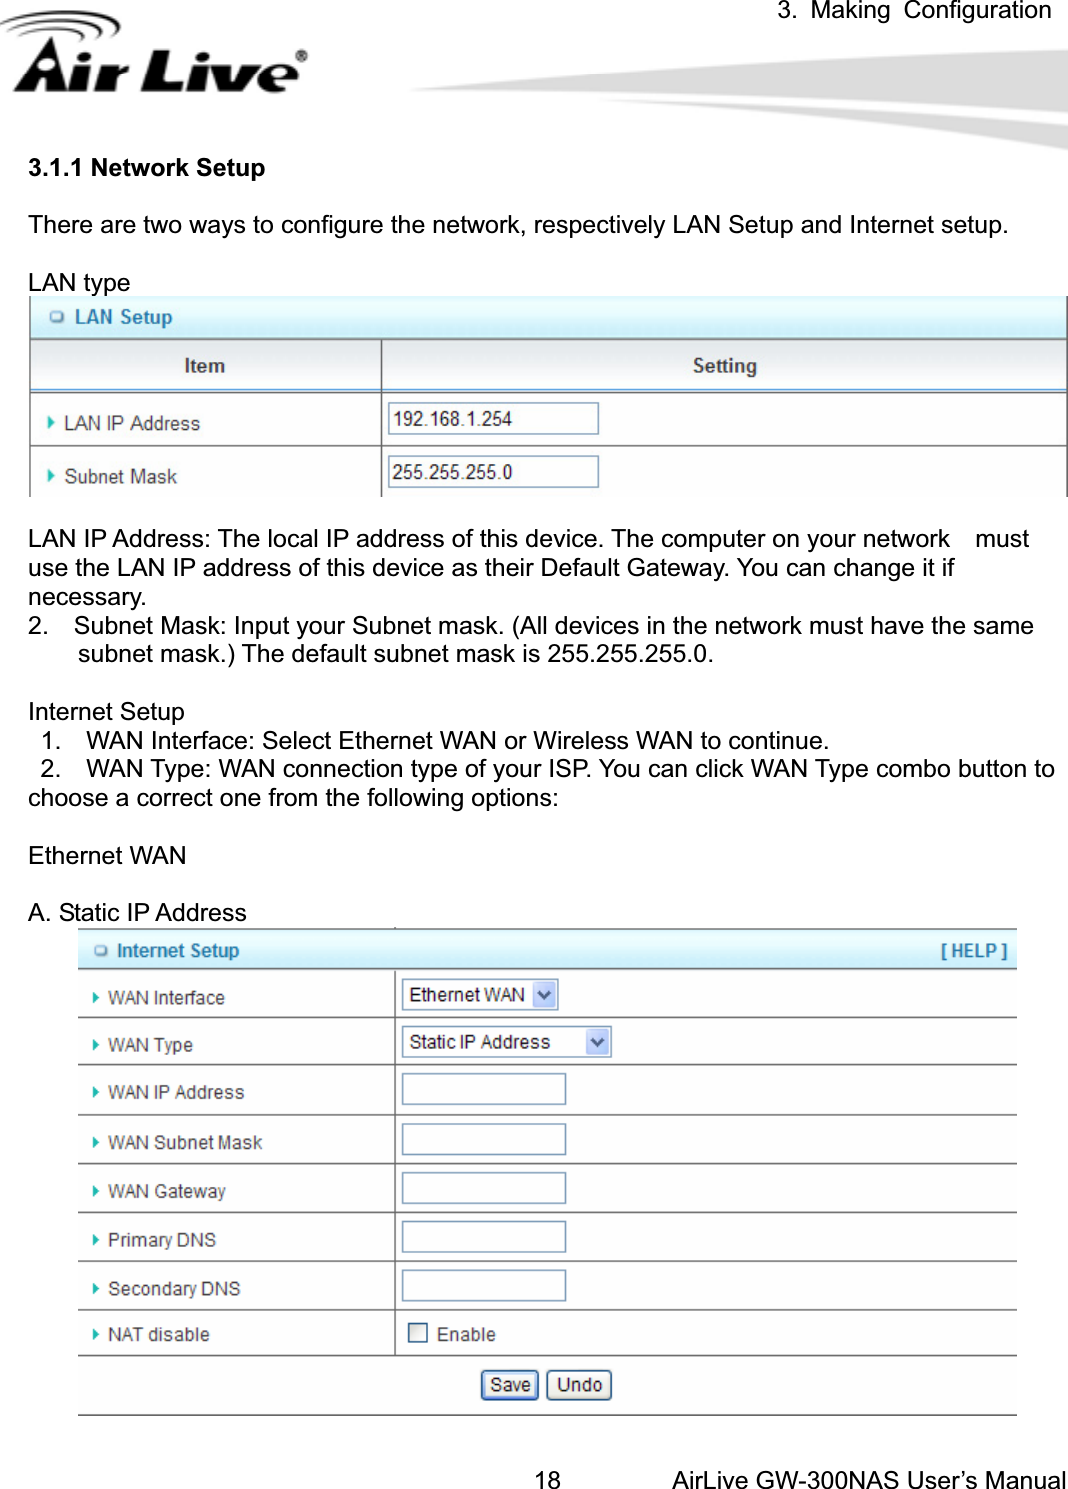 3. Making ConfigurationAirLive GW-300NAS User’s Manual183.1.1 Network Setup There are two ways to configure the network, respectively LAN Setup and Internet setup. LAN type LAN IP Address: The local IP address of this device. The computer on your network    must use the LAN IP address of this device as their Default Gateway. You can change it if necessary. 2.    Subnet Mask: Input your Subnet mask. (All devices in the network must have the same             subnet mask.) The default subnet mask is 255.255.255.0. Internet Setup   1.    WAN Interface: Select Ethernet WAN or Wireless WAN to continue.   2.    WAN Type: WAN connection type of your ISP. You can click WAN Type combo button to choose a correct one from the following options:     Ethernet WAN A. Static IP Address 